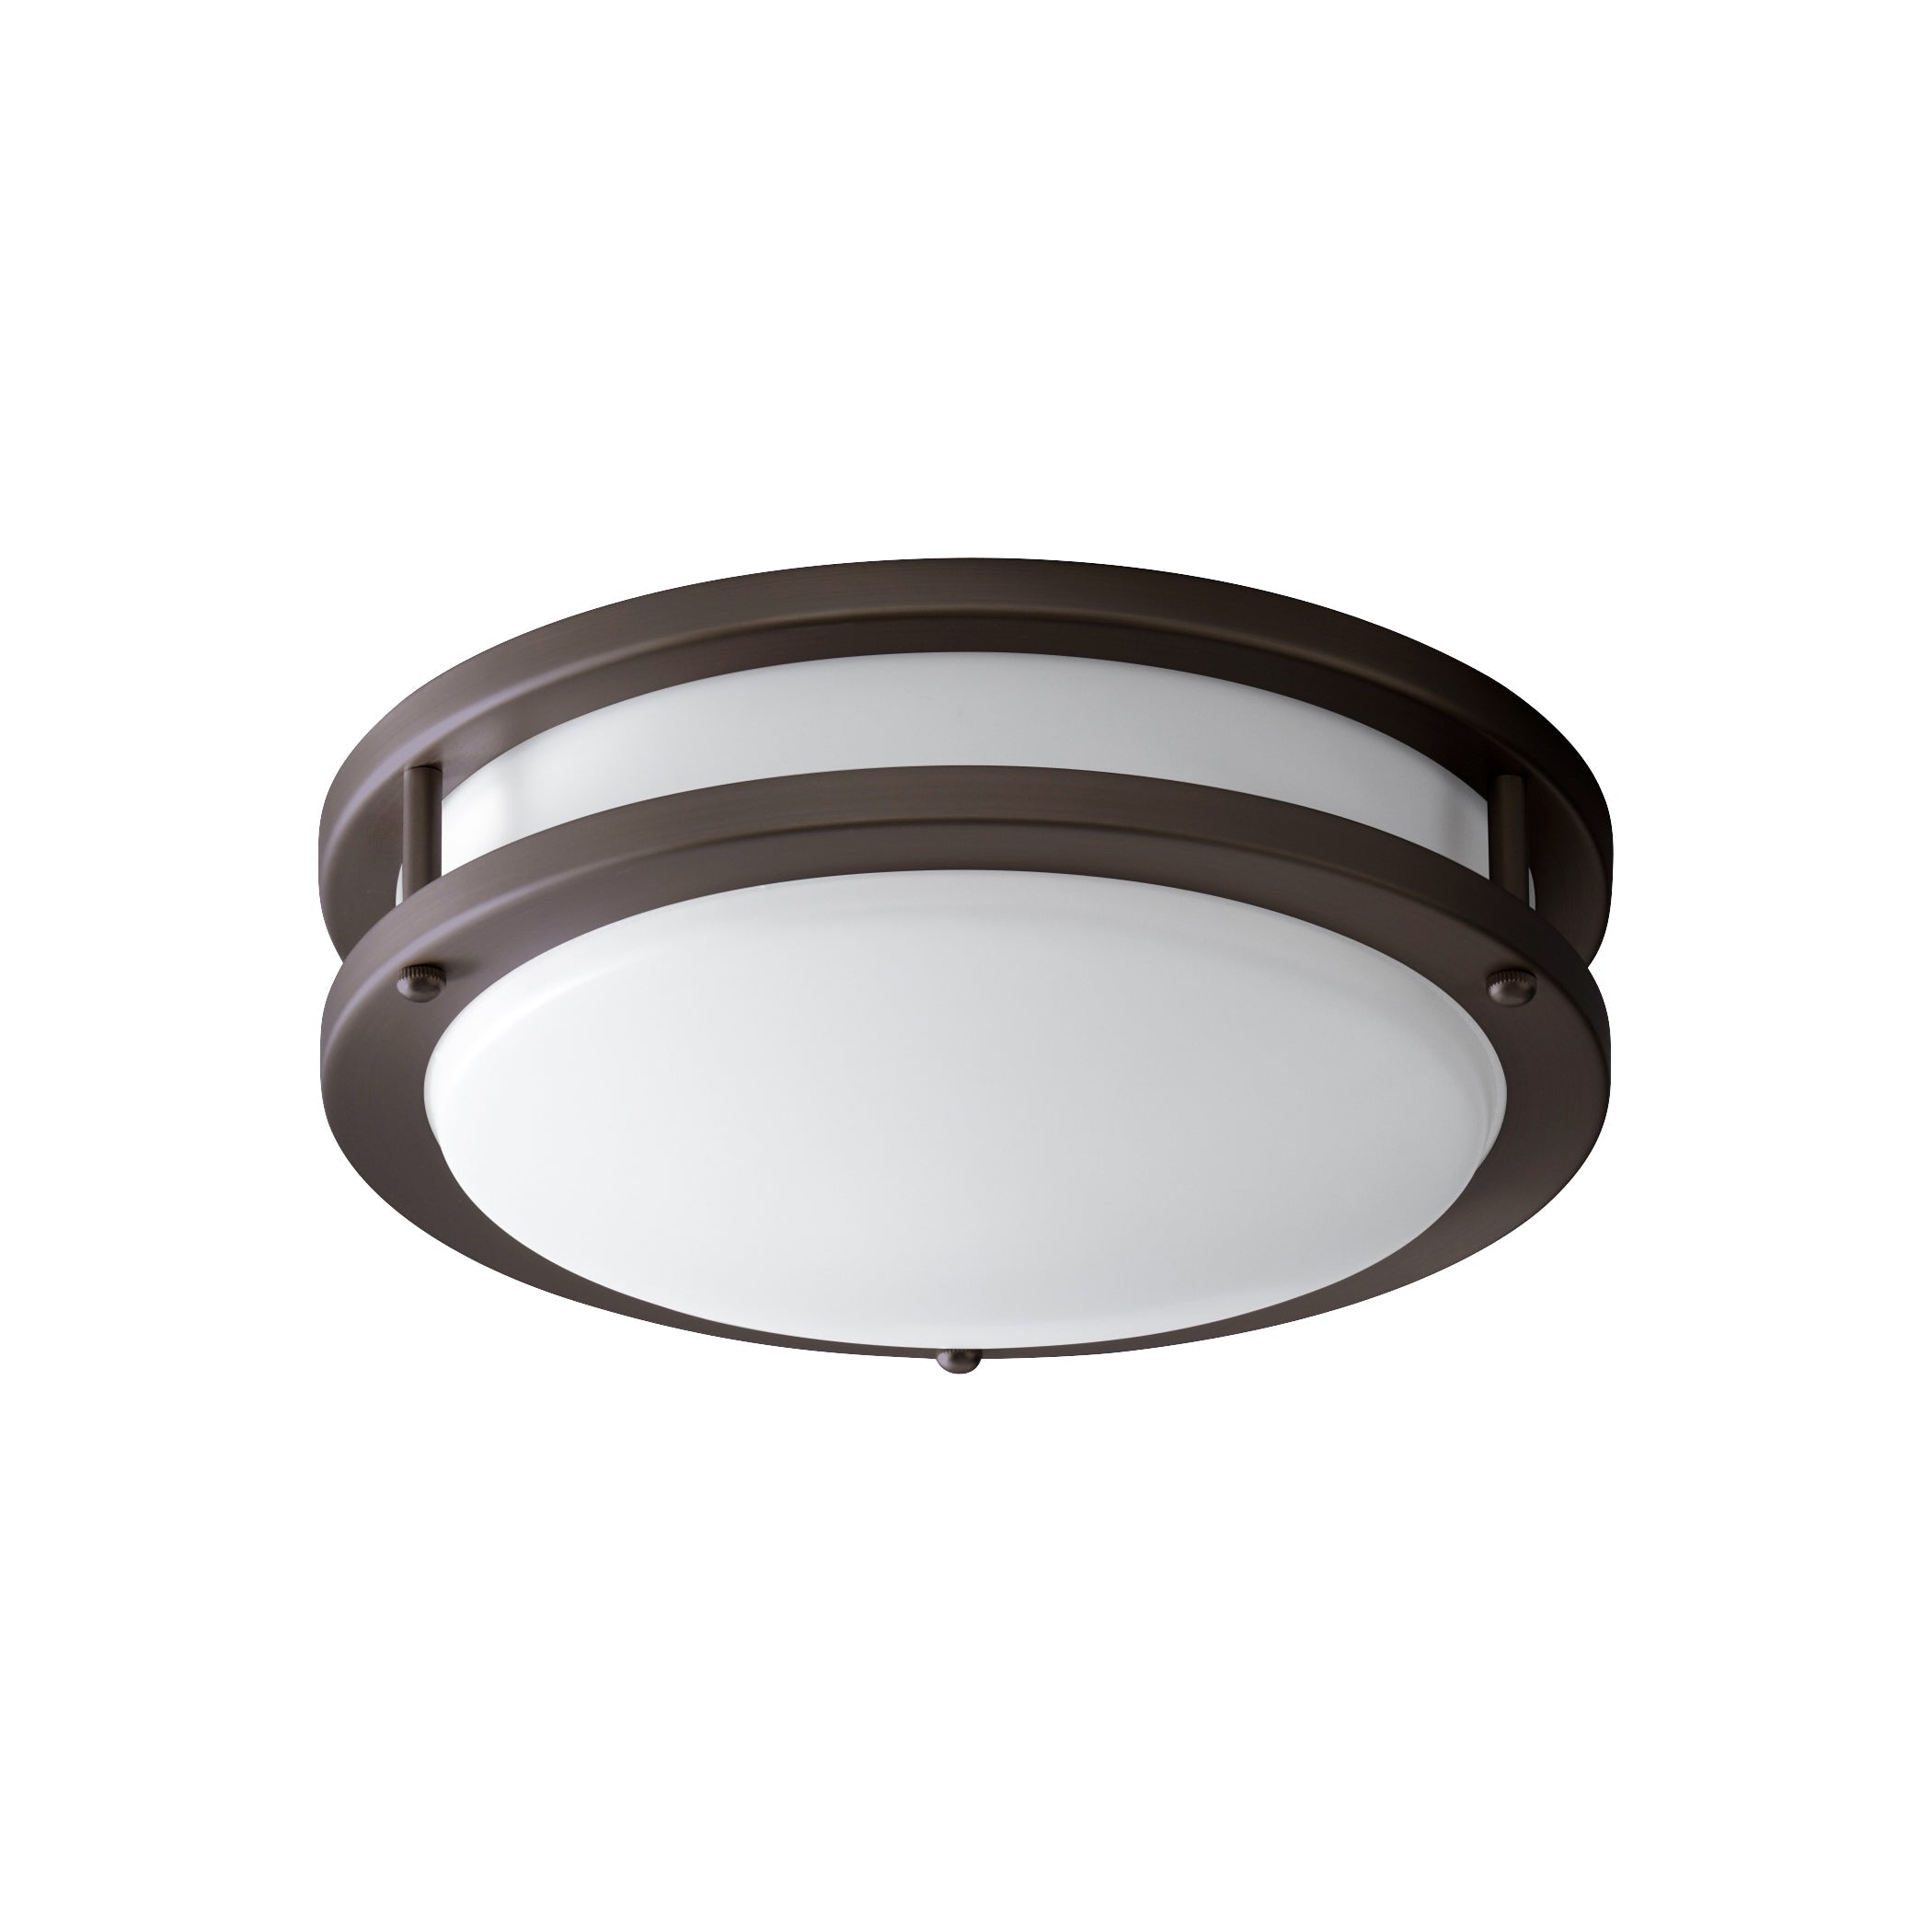 Oxygen Oracle 3-618-22 Ceiling Mount - Oiled Bronze